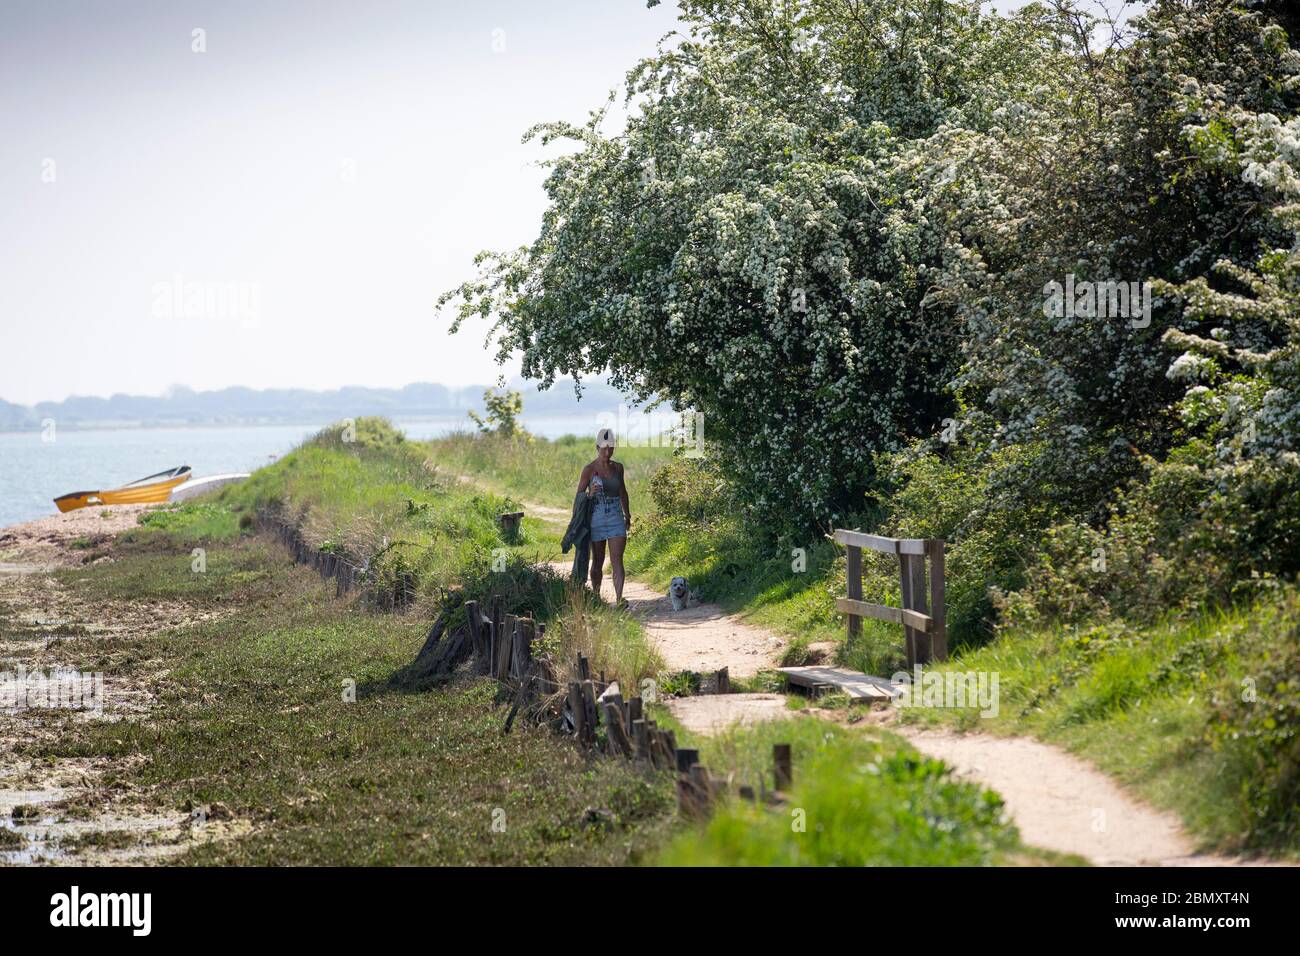 Young woman walking alone along coastal path during 2020 Covid-19 outbreak Stock Photo